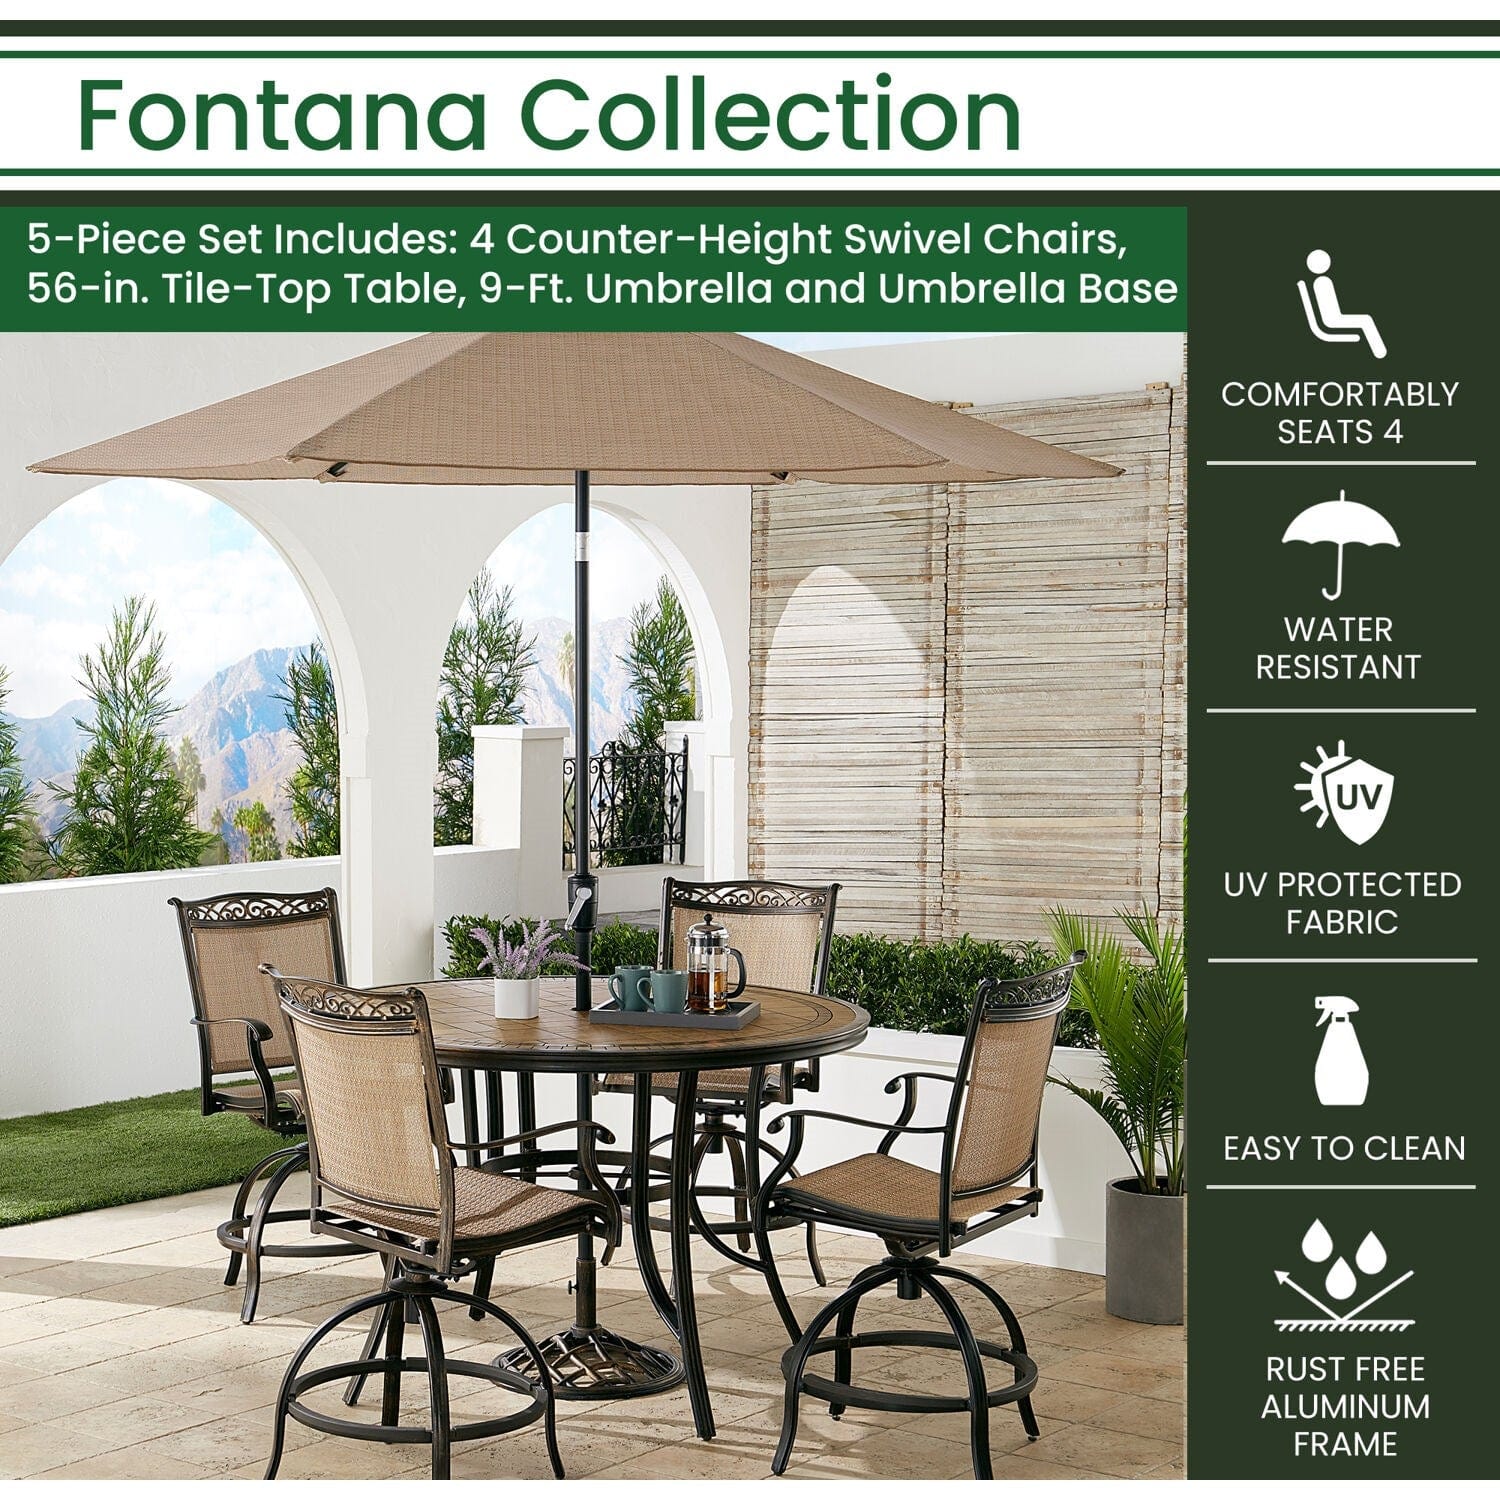 Hanover Outdoor Dining Set Hanover Fontana 5-Piece High-Dining Set with 4 Counter-Height Swivel Chairs, 56-in. Tile-Top Table, 9-Ft. Umbrella and Umbrella Base | FNTDN5PCPBRTN-SU